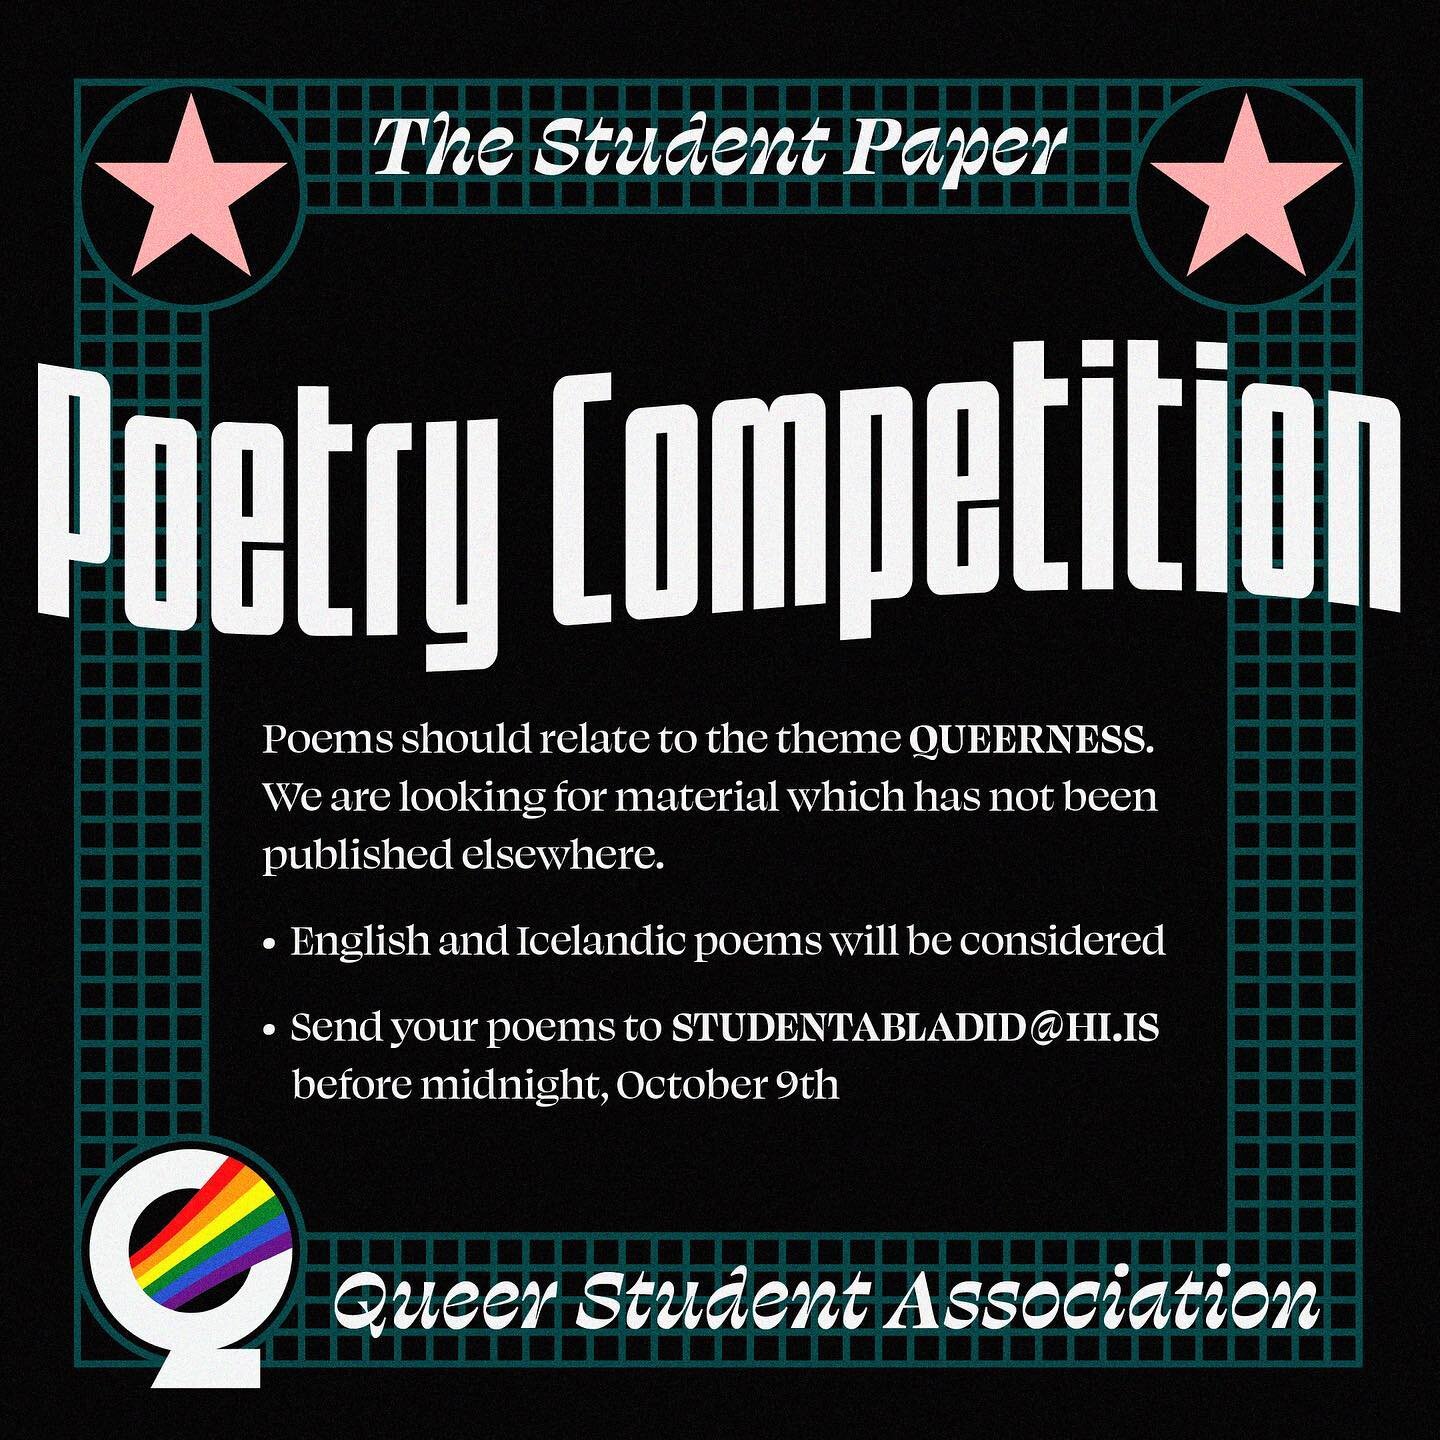 In celebration of a new school year, The Student Paper and Q - Queer Student Association are hosting a poetry competition! 

The theme is QUEERNESS and selected poems will be published in the Student Paper&rsquo;s first issue, on the Paper&rsquo;s we